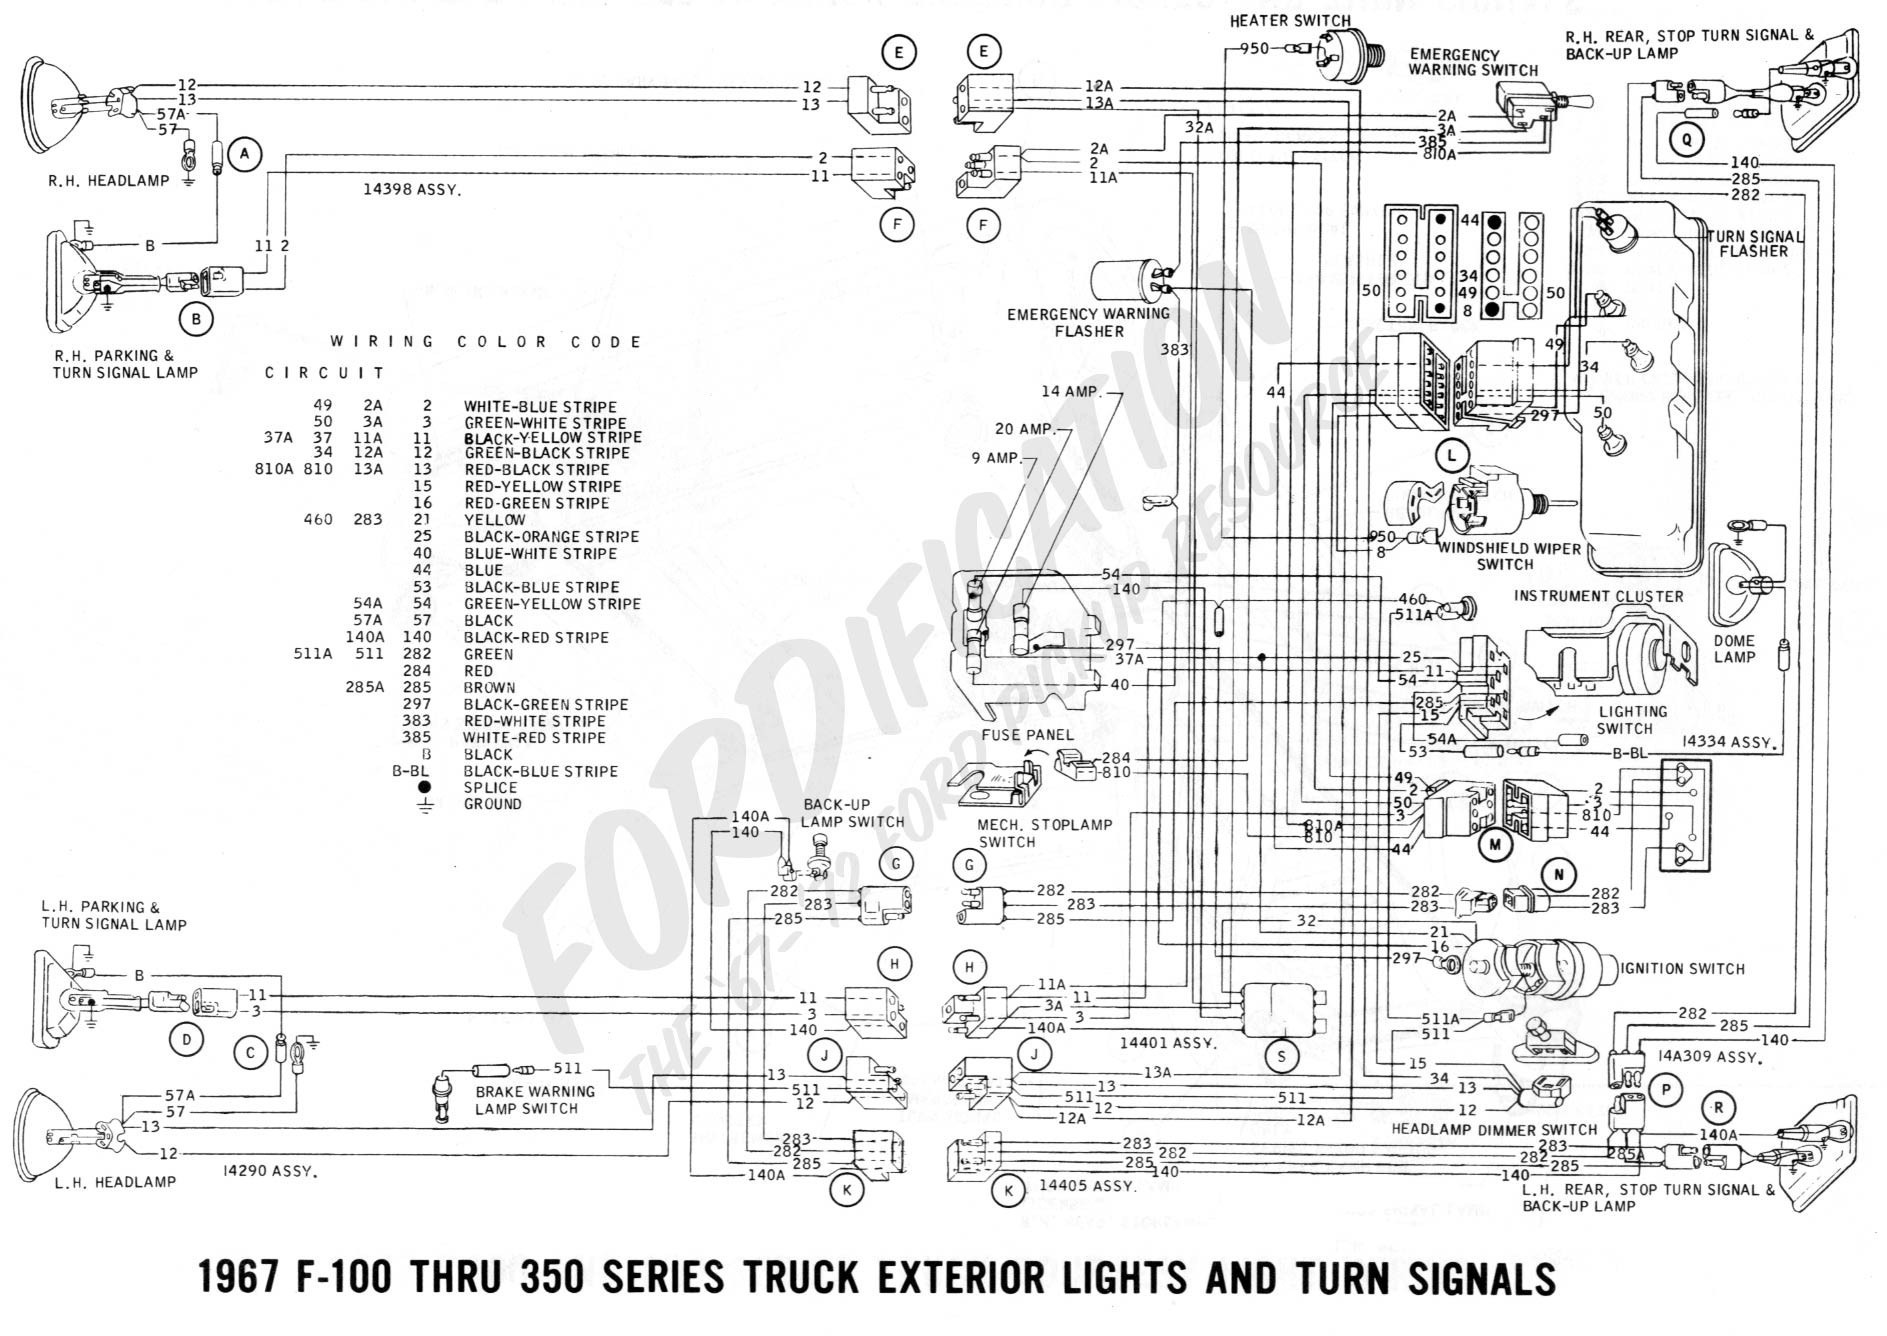 2004 Volvo S40 Engine Diagram Refrence Wiring Diagram Alternator Warning Light Of 2004 Volvo S40 Engine Diagram